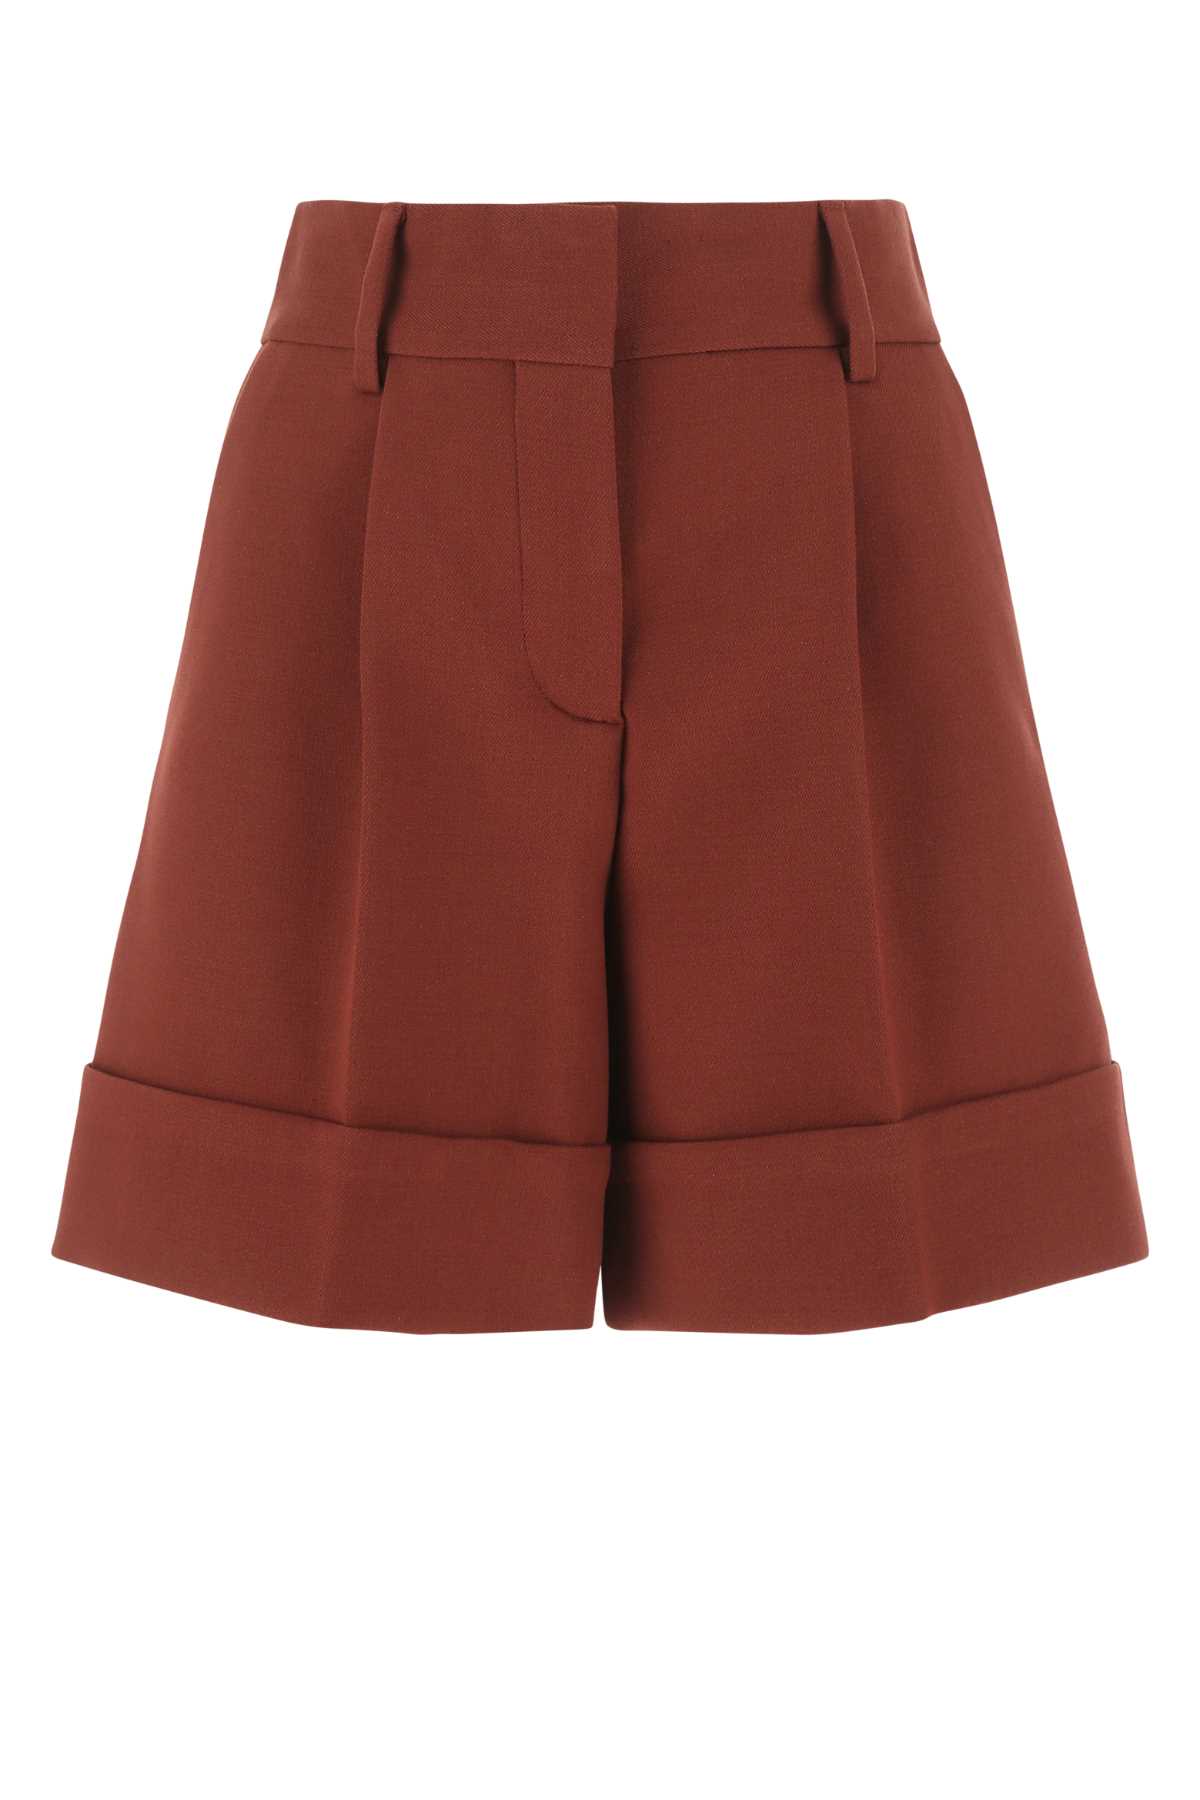 See by Chloé Brown Stretch Cotton Blend Shorts